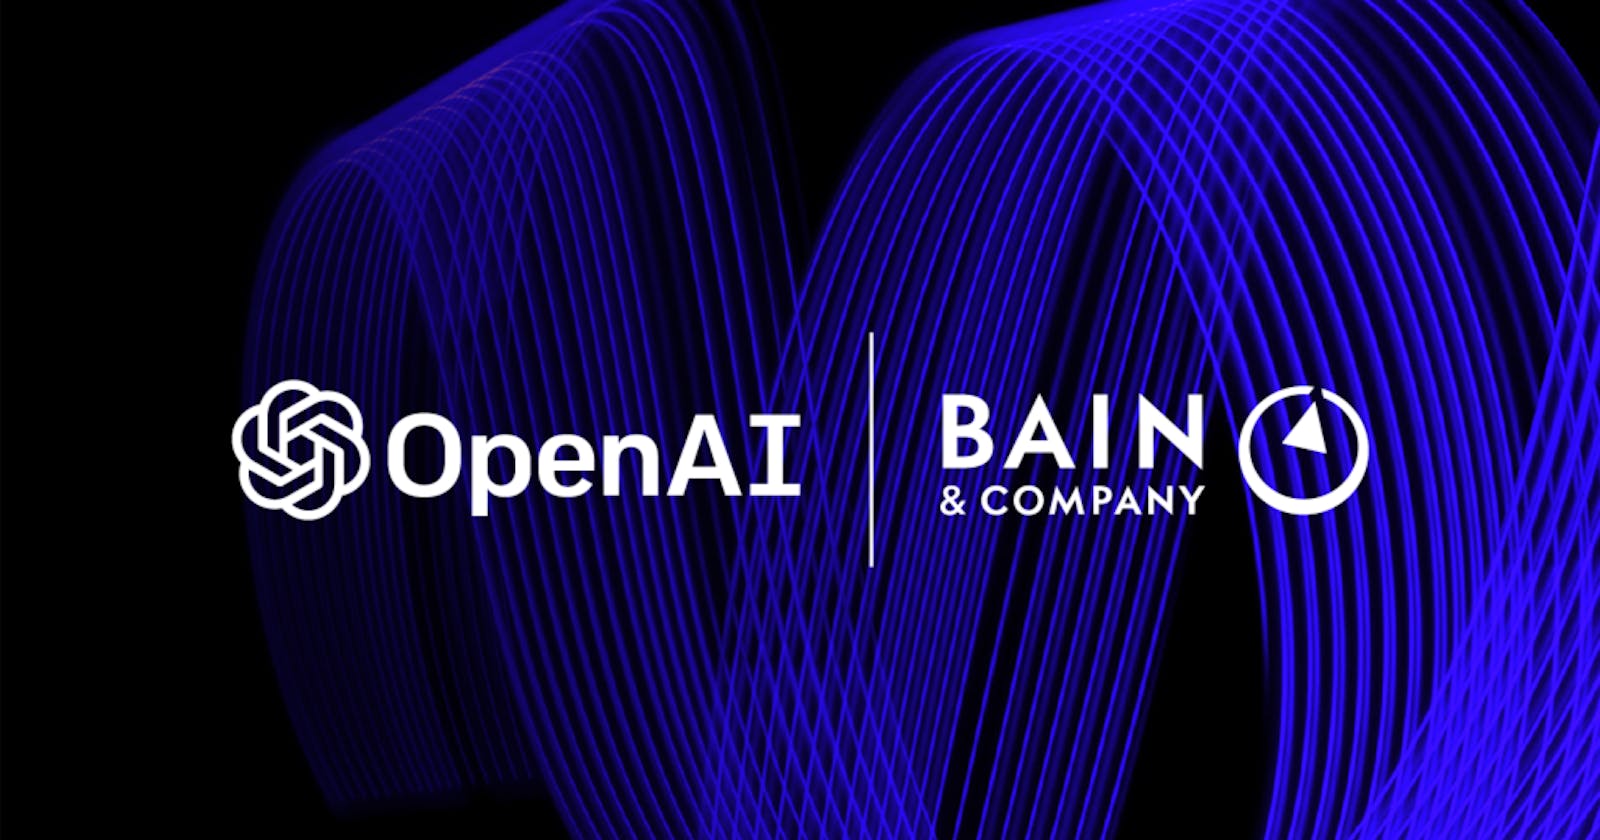 One Of The World's Most Prestigious Consulting Firms, Bain & Company Is Teaming Up With OpenAl To Distribute Its Al Tech To Clients